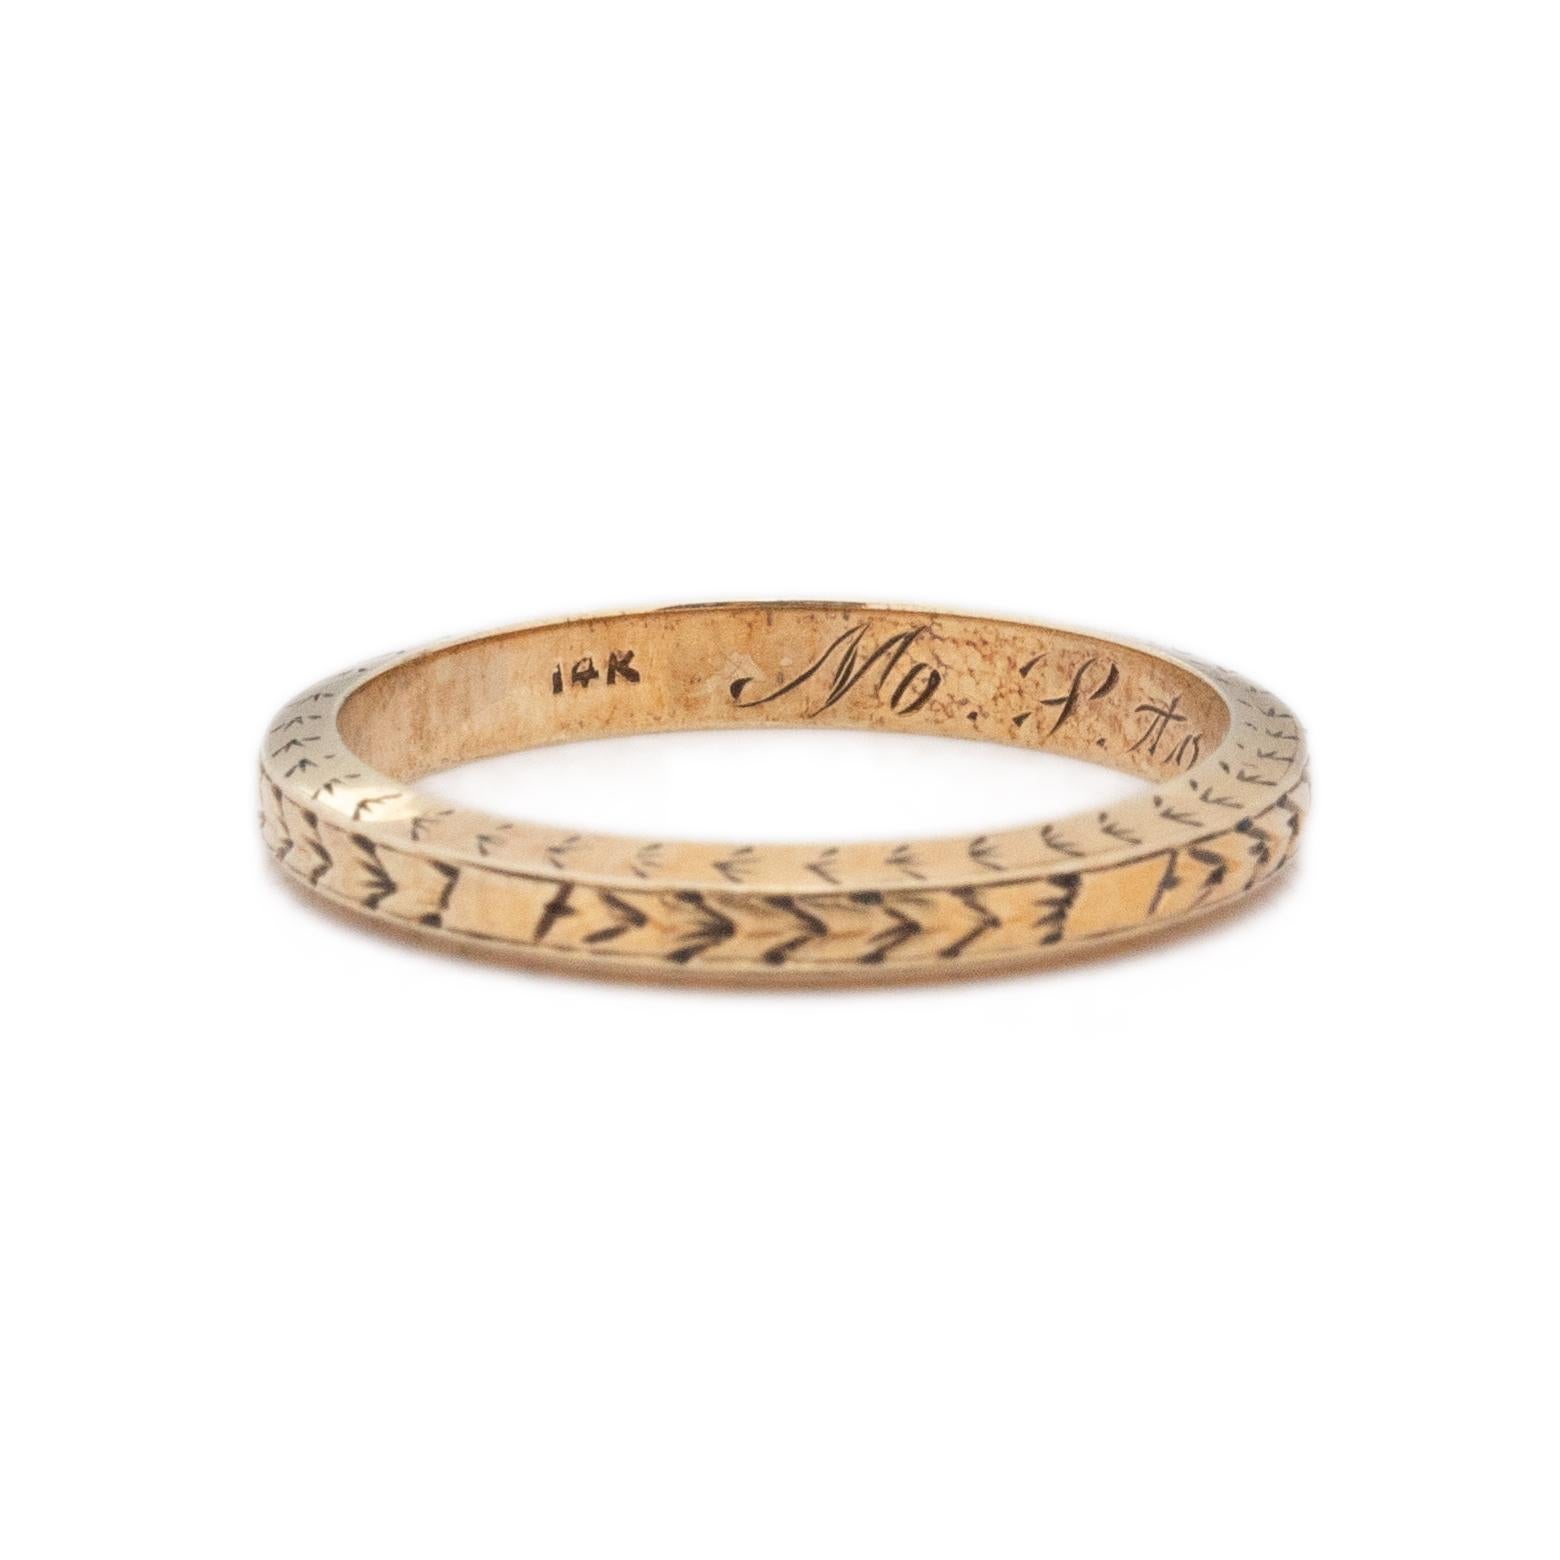 Here we have a great example of the art deco style, this band is crafted in 14K yellow gold. With a simple chevron or breaded design, keeping the look simple and versatile. Along with the deep relief engraving, this piece has a great personalization